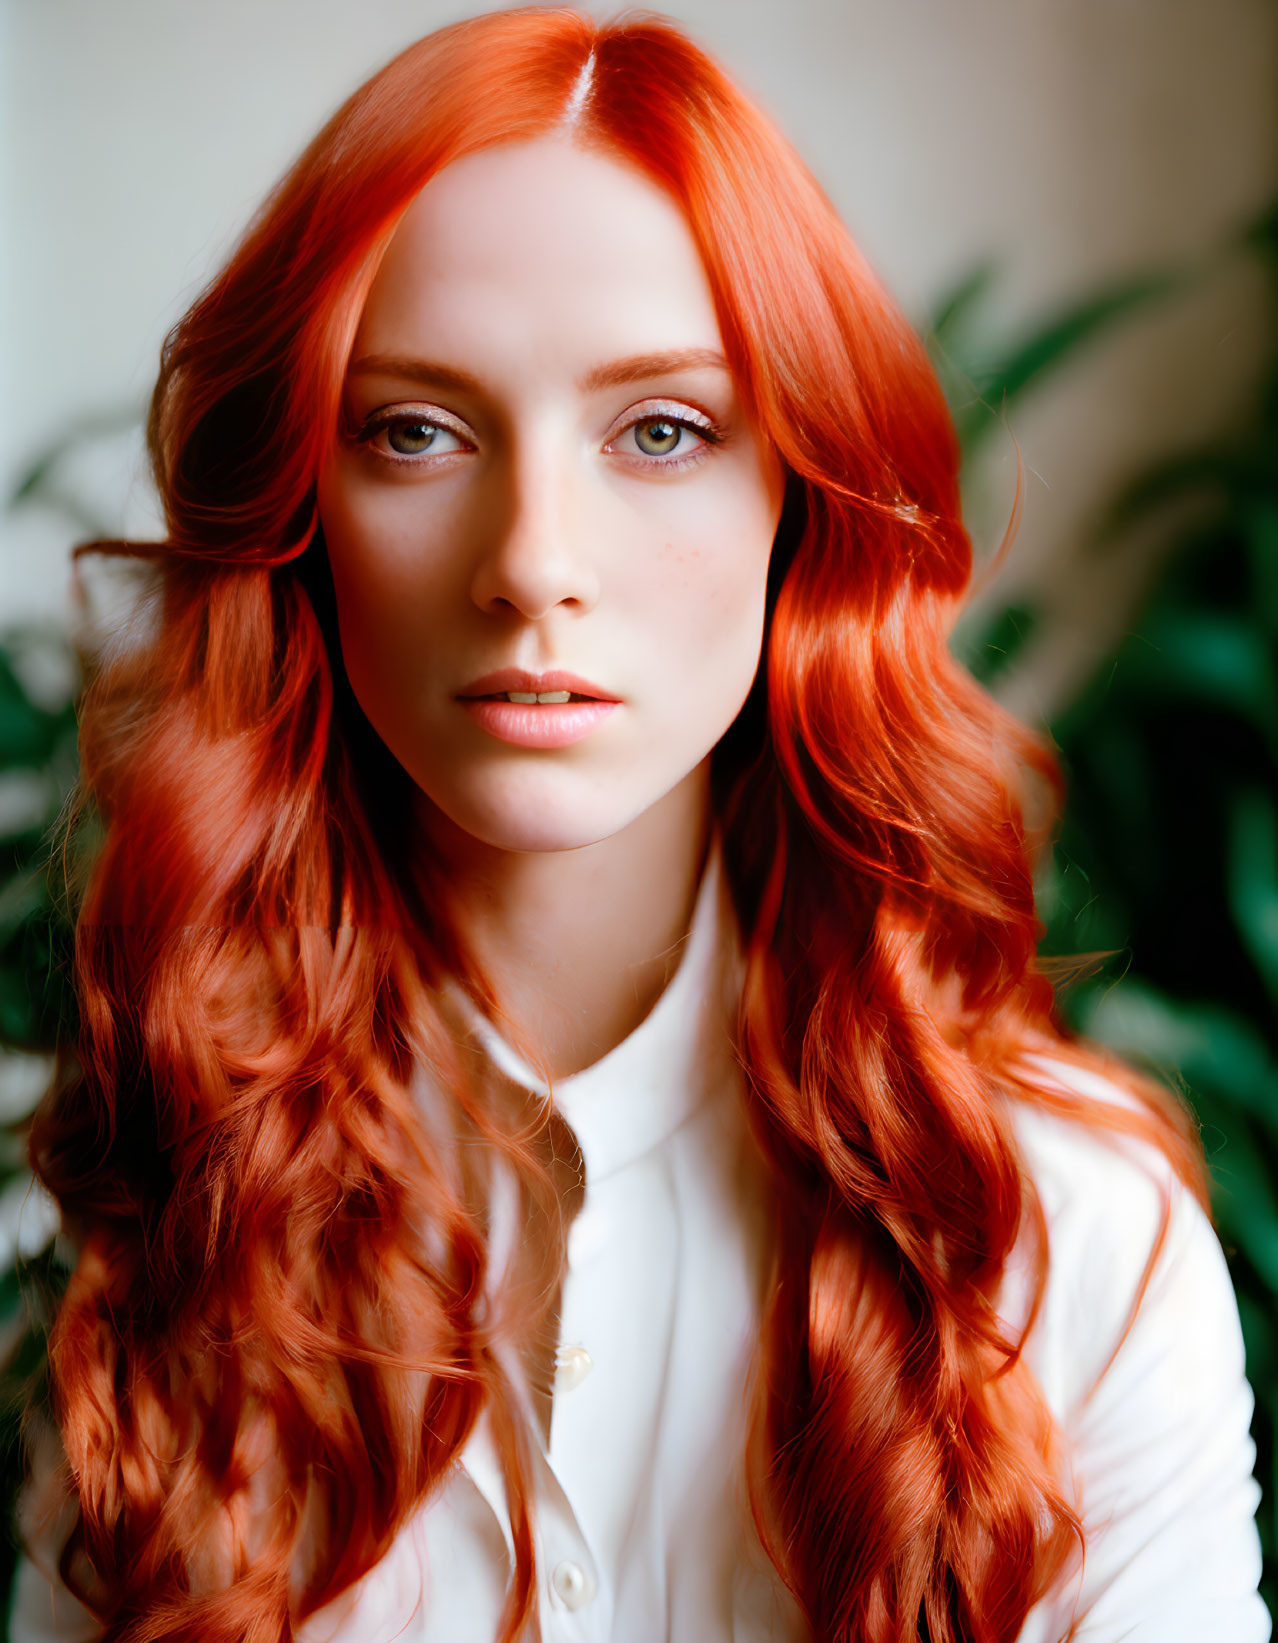 Portrait of person with long red hair, fair skin, and green eyes in white shirt on green background